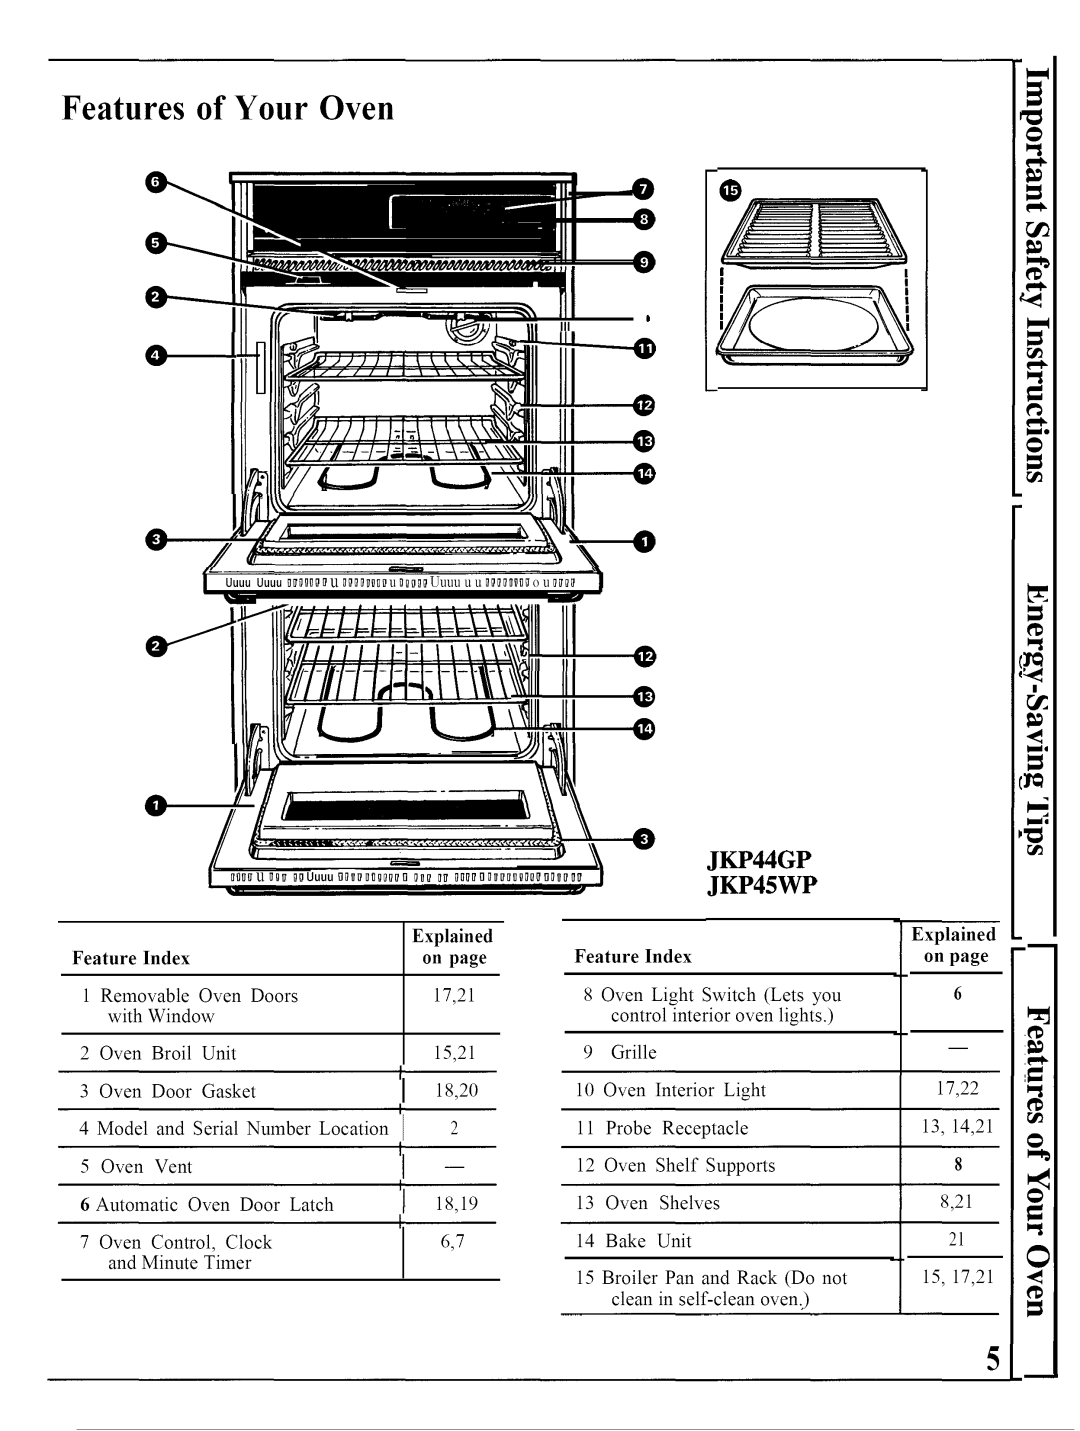 GE JKP44GP warranty Features of Your Oven, JKP45WP, d 